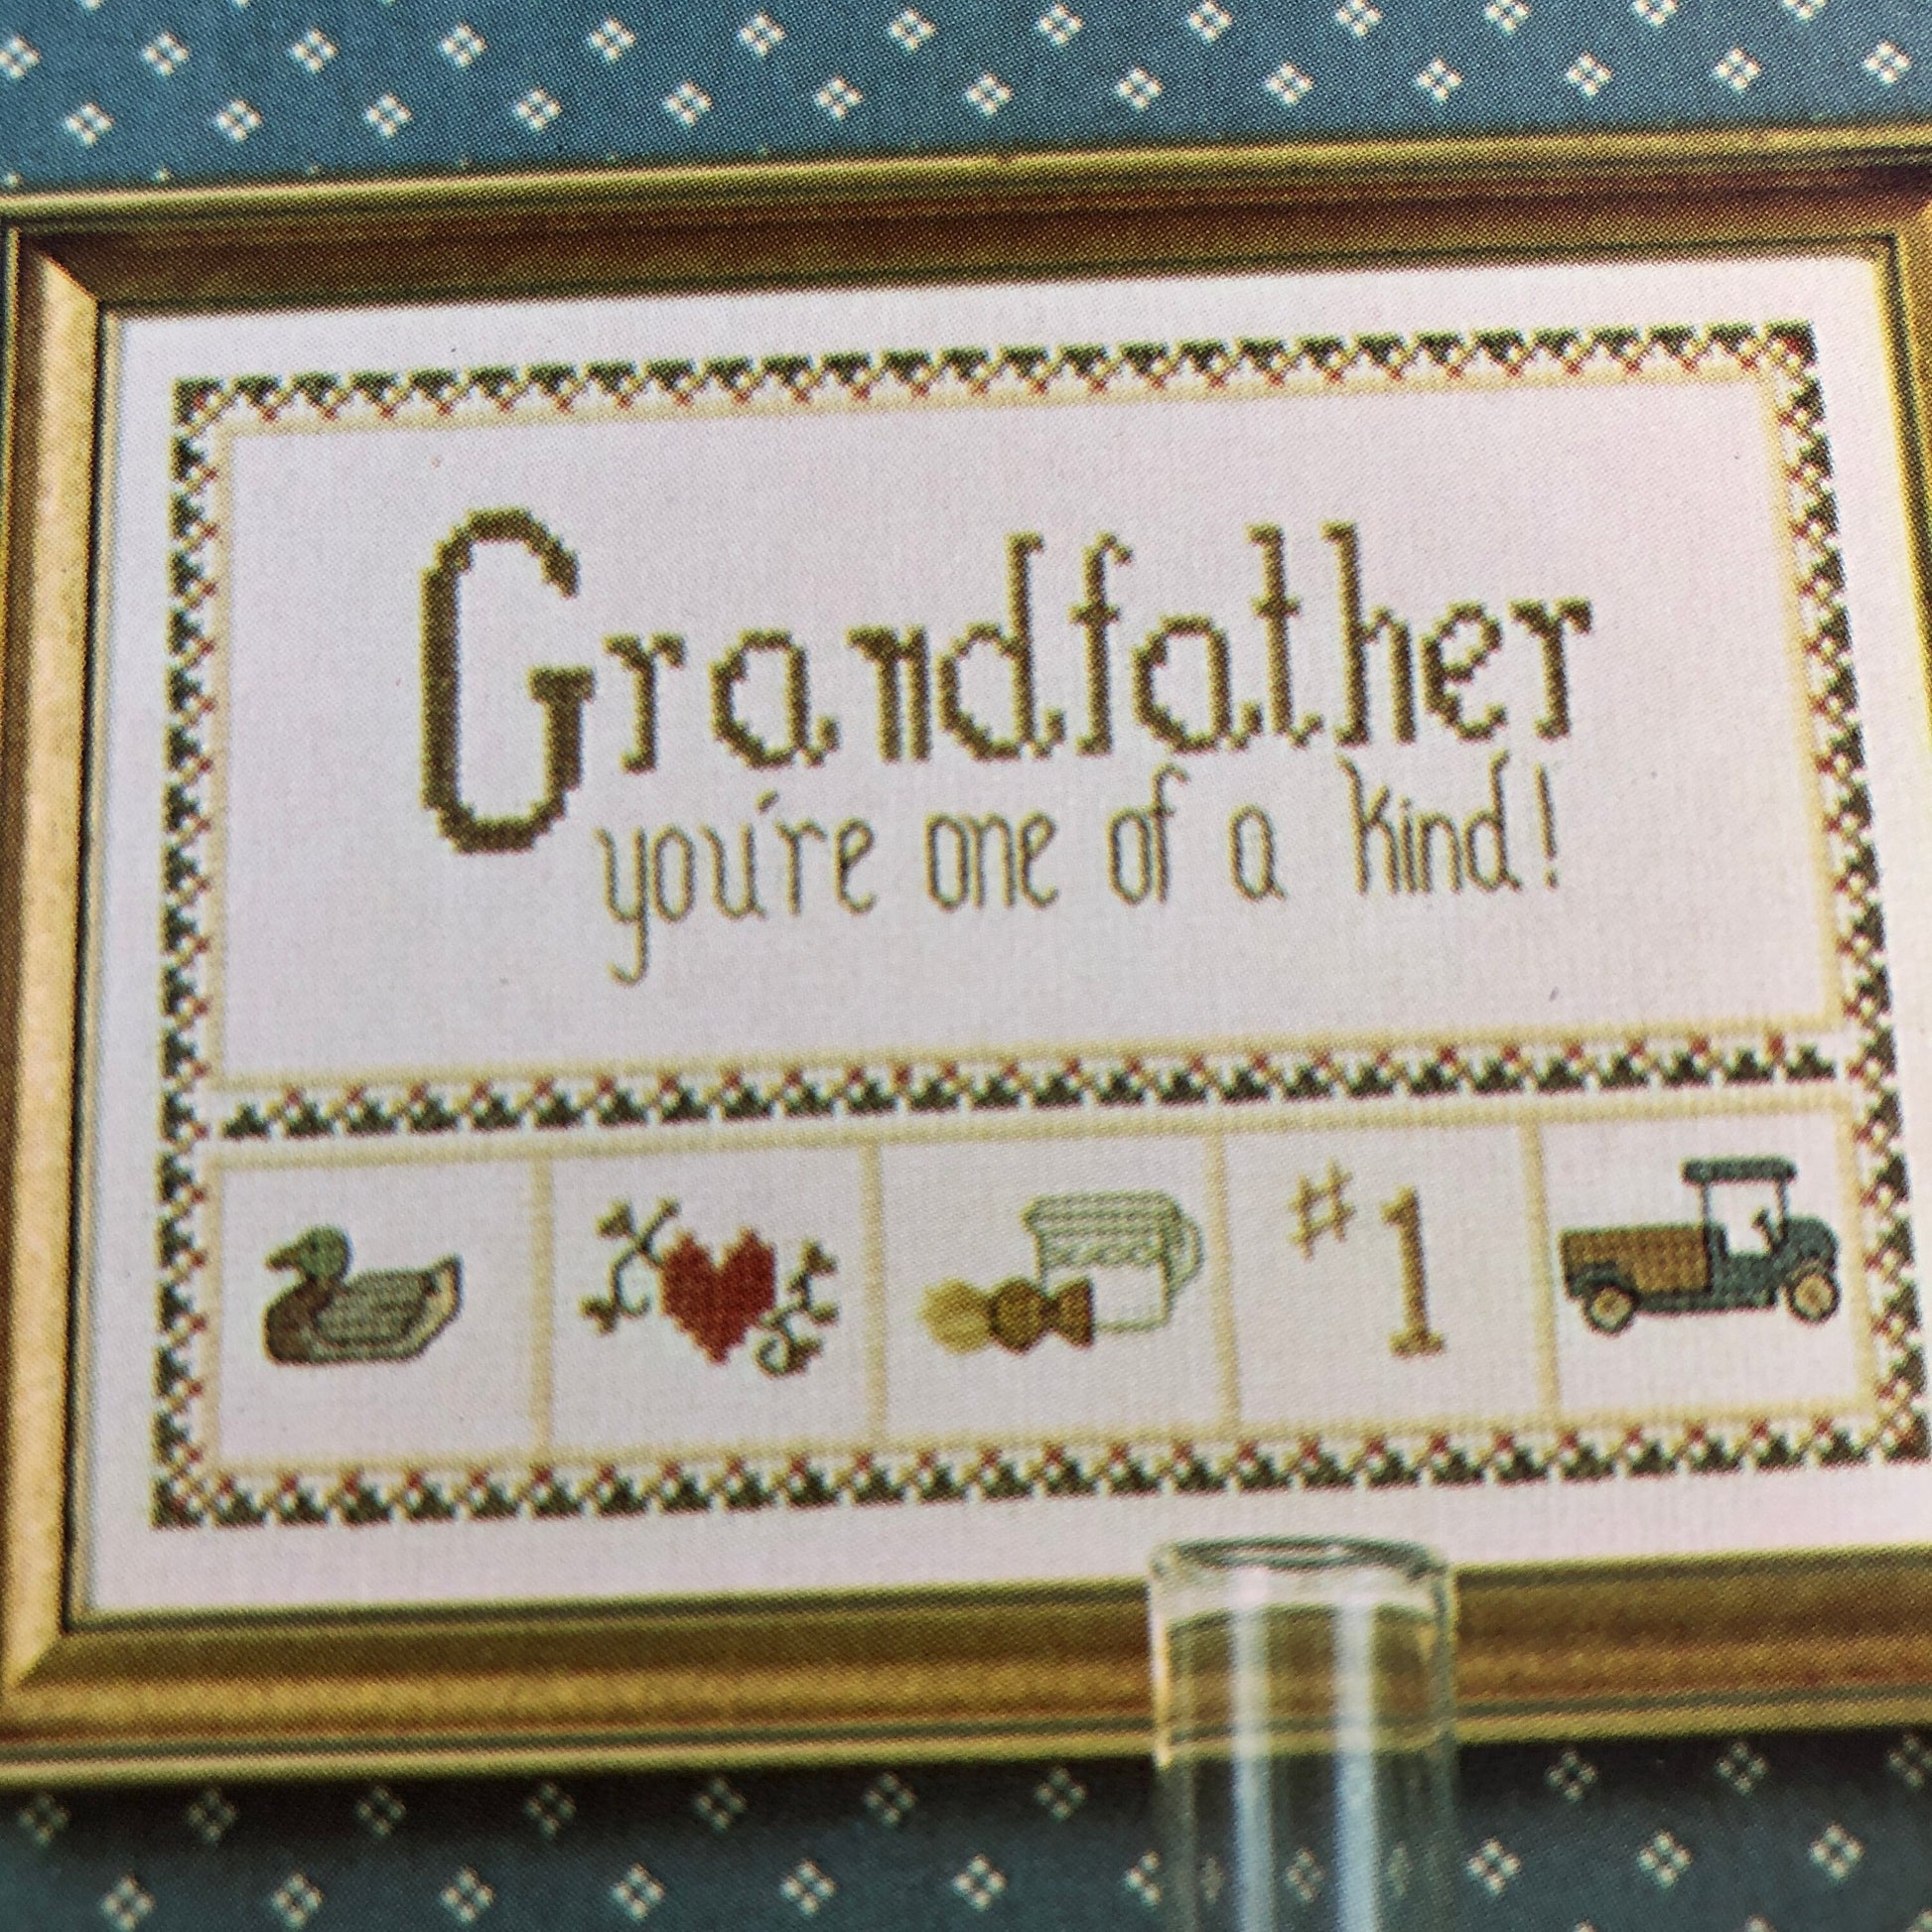 Grandfathers Are special, T & N Designs, Vintage 1984, Counted Cross Stitch Designs